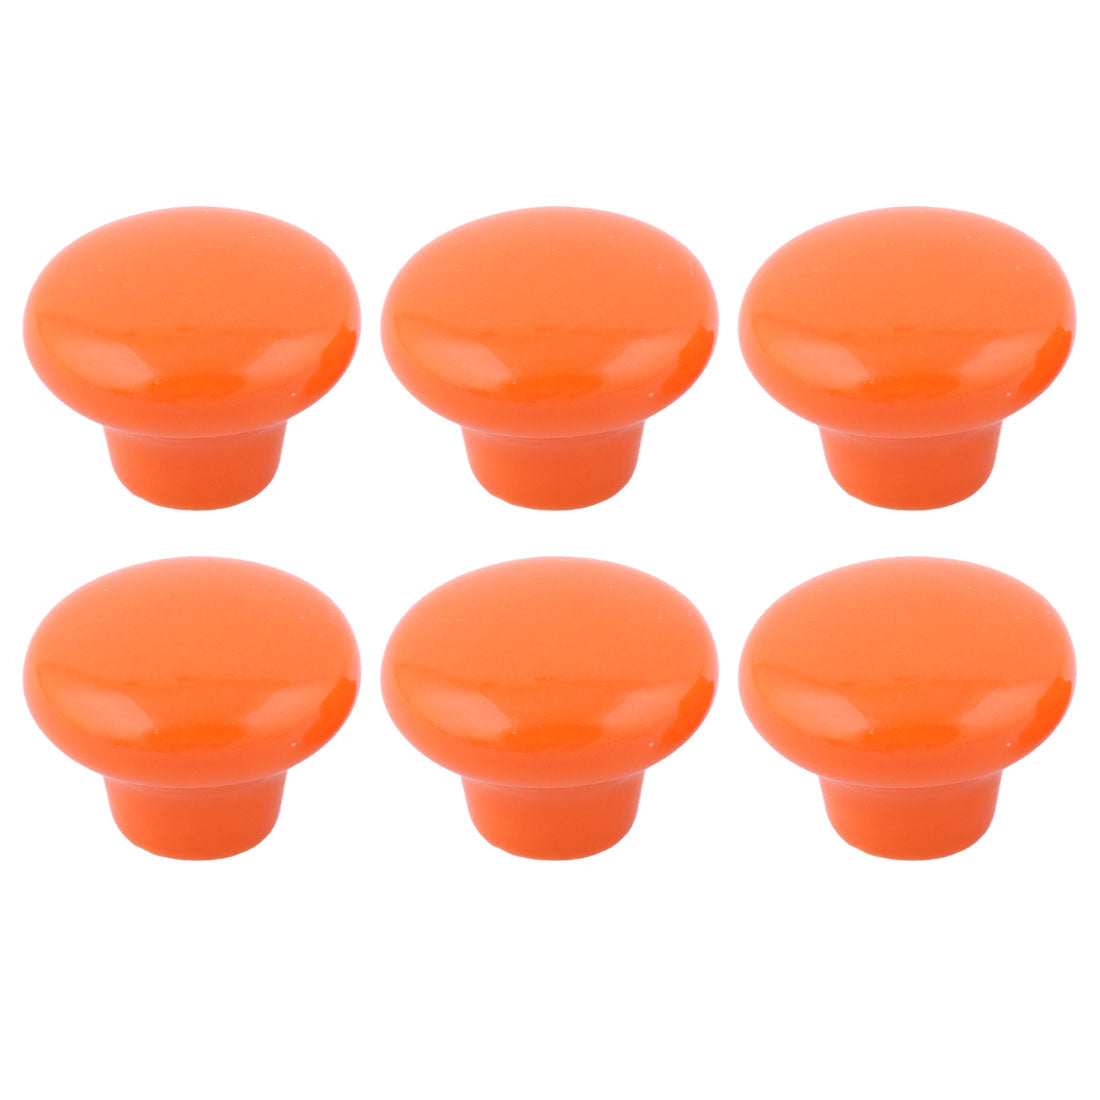 uxcell Uxcell Home Hotel Ceramic Round Furniture Cupboard Wardrobe Drawer Pull Knobs Orange 6 Pcs